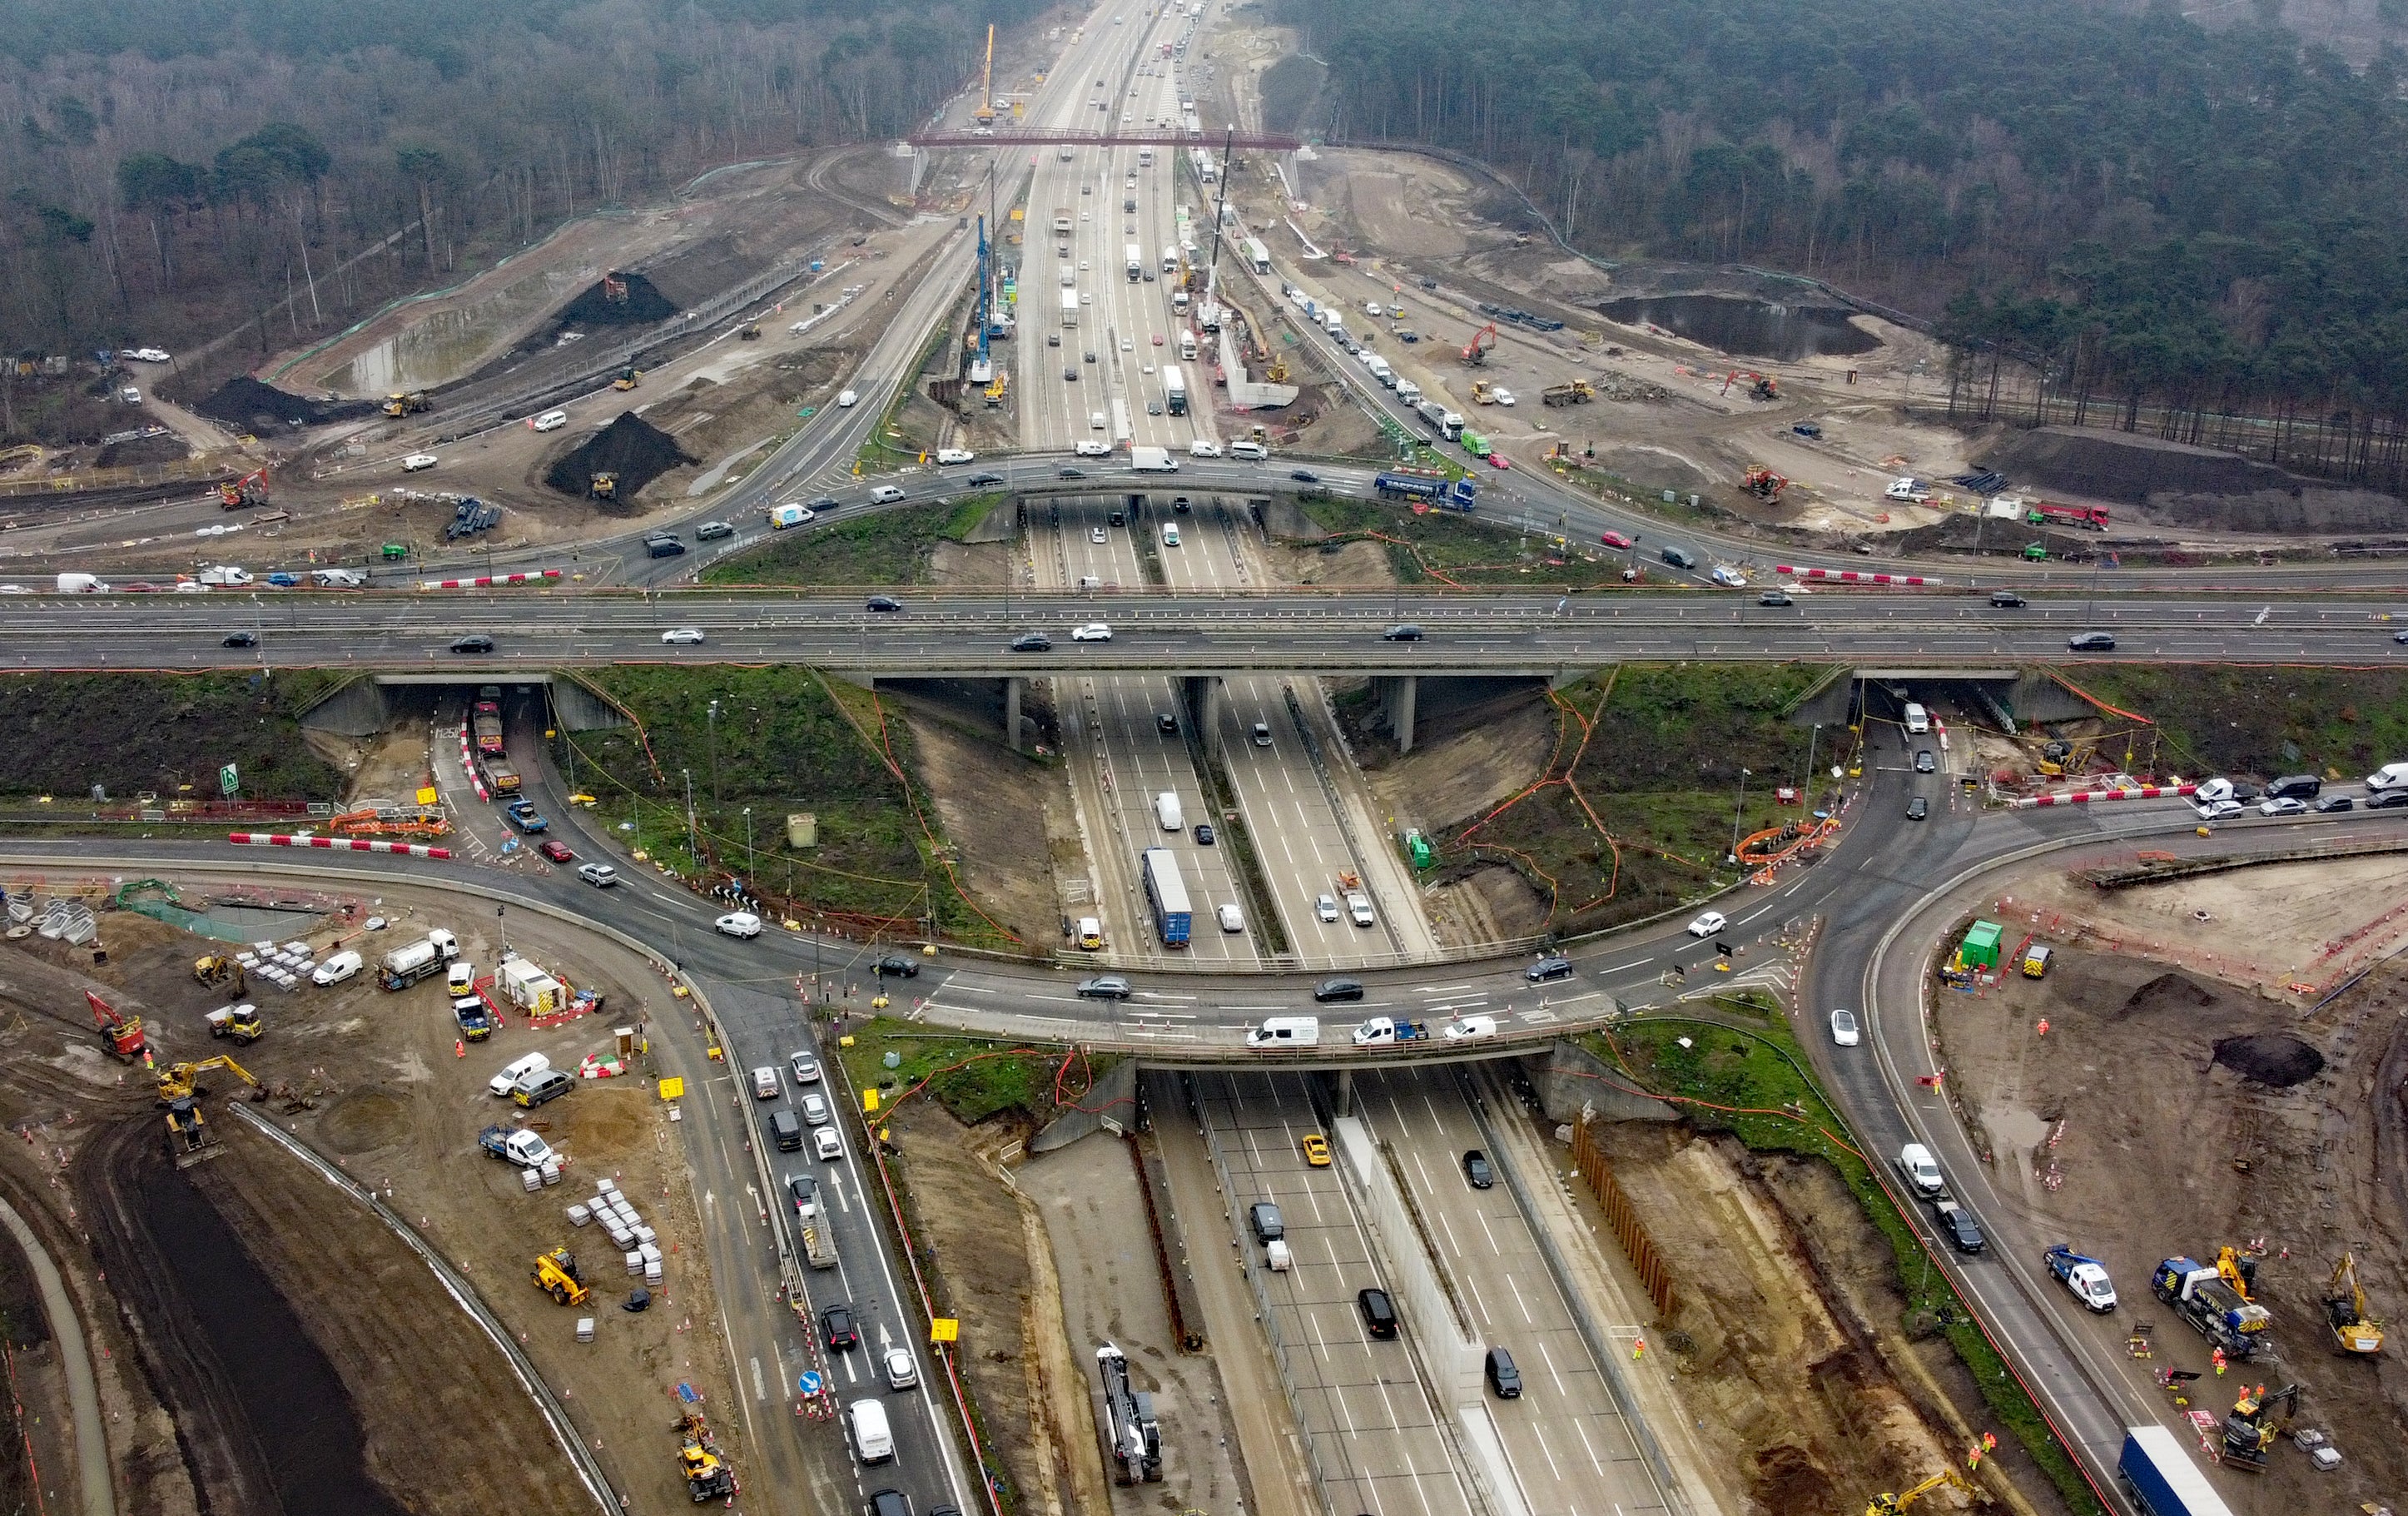 Up the junction: The M25-A3 intersection where much of the work will take place during the closure from 15 to 18 March